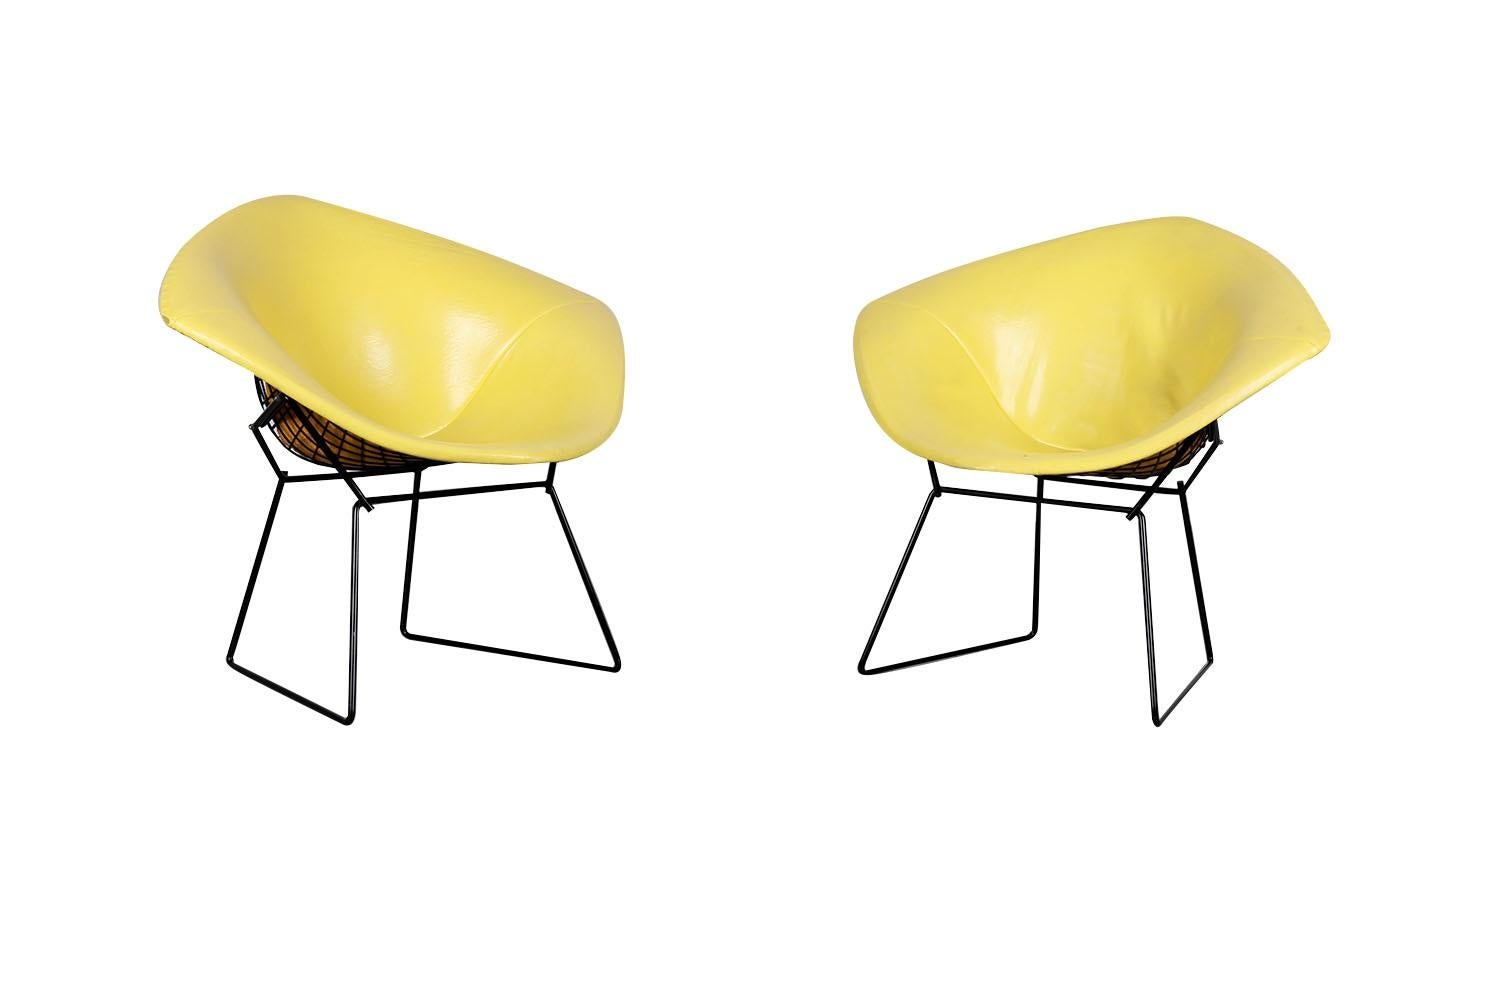 A beautiful pair of vintage, knoll, metal mid century, Harry Bertoia, Diamond Chairs. Nice early Harry Bertoia Diamond Chairs for Knoll. A vintage iconic pair designed by Harry Bertoia manufactured by Knoll features original yellow, removable,